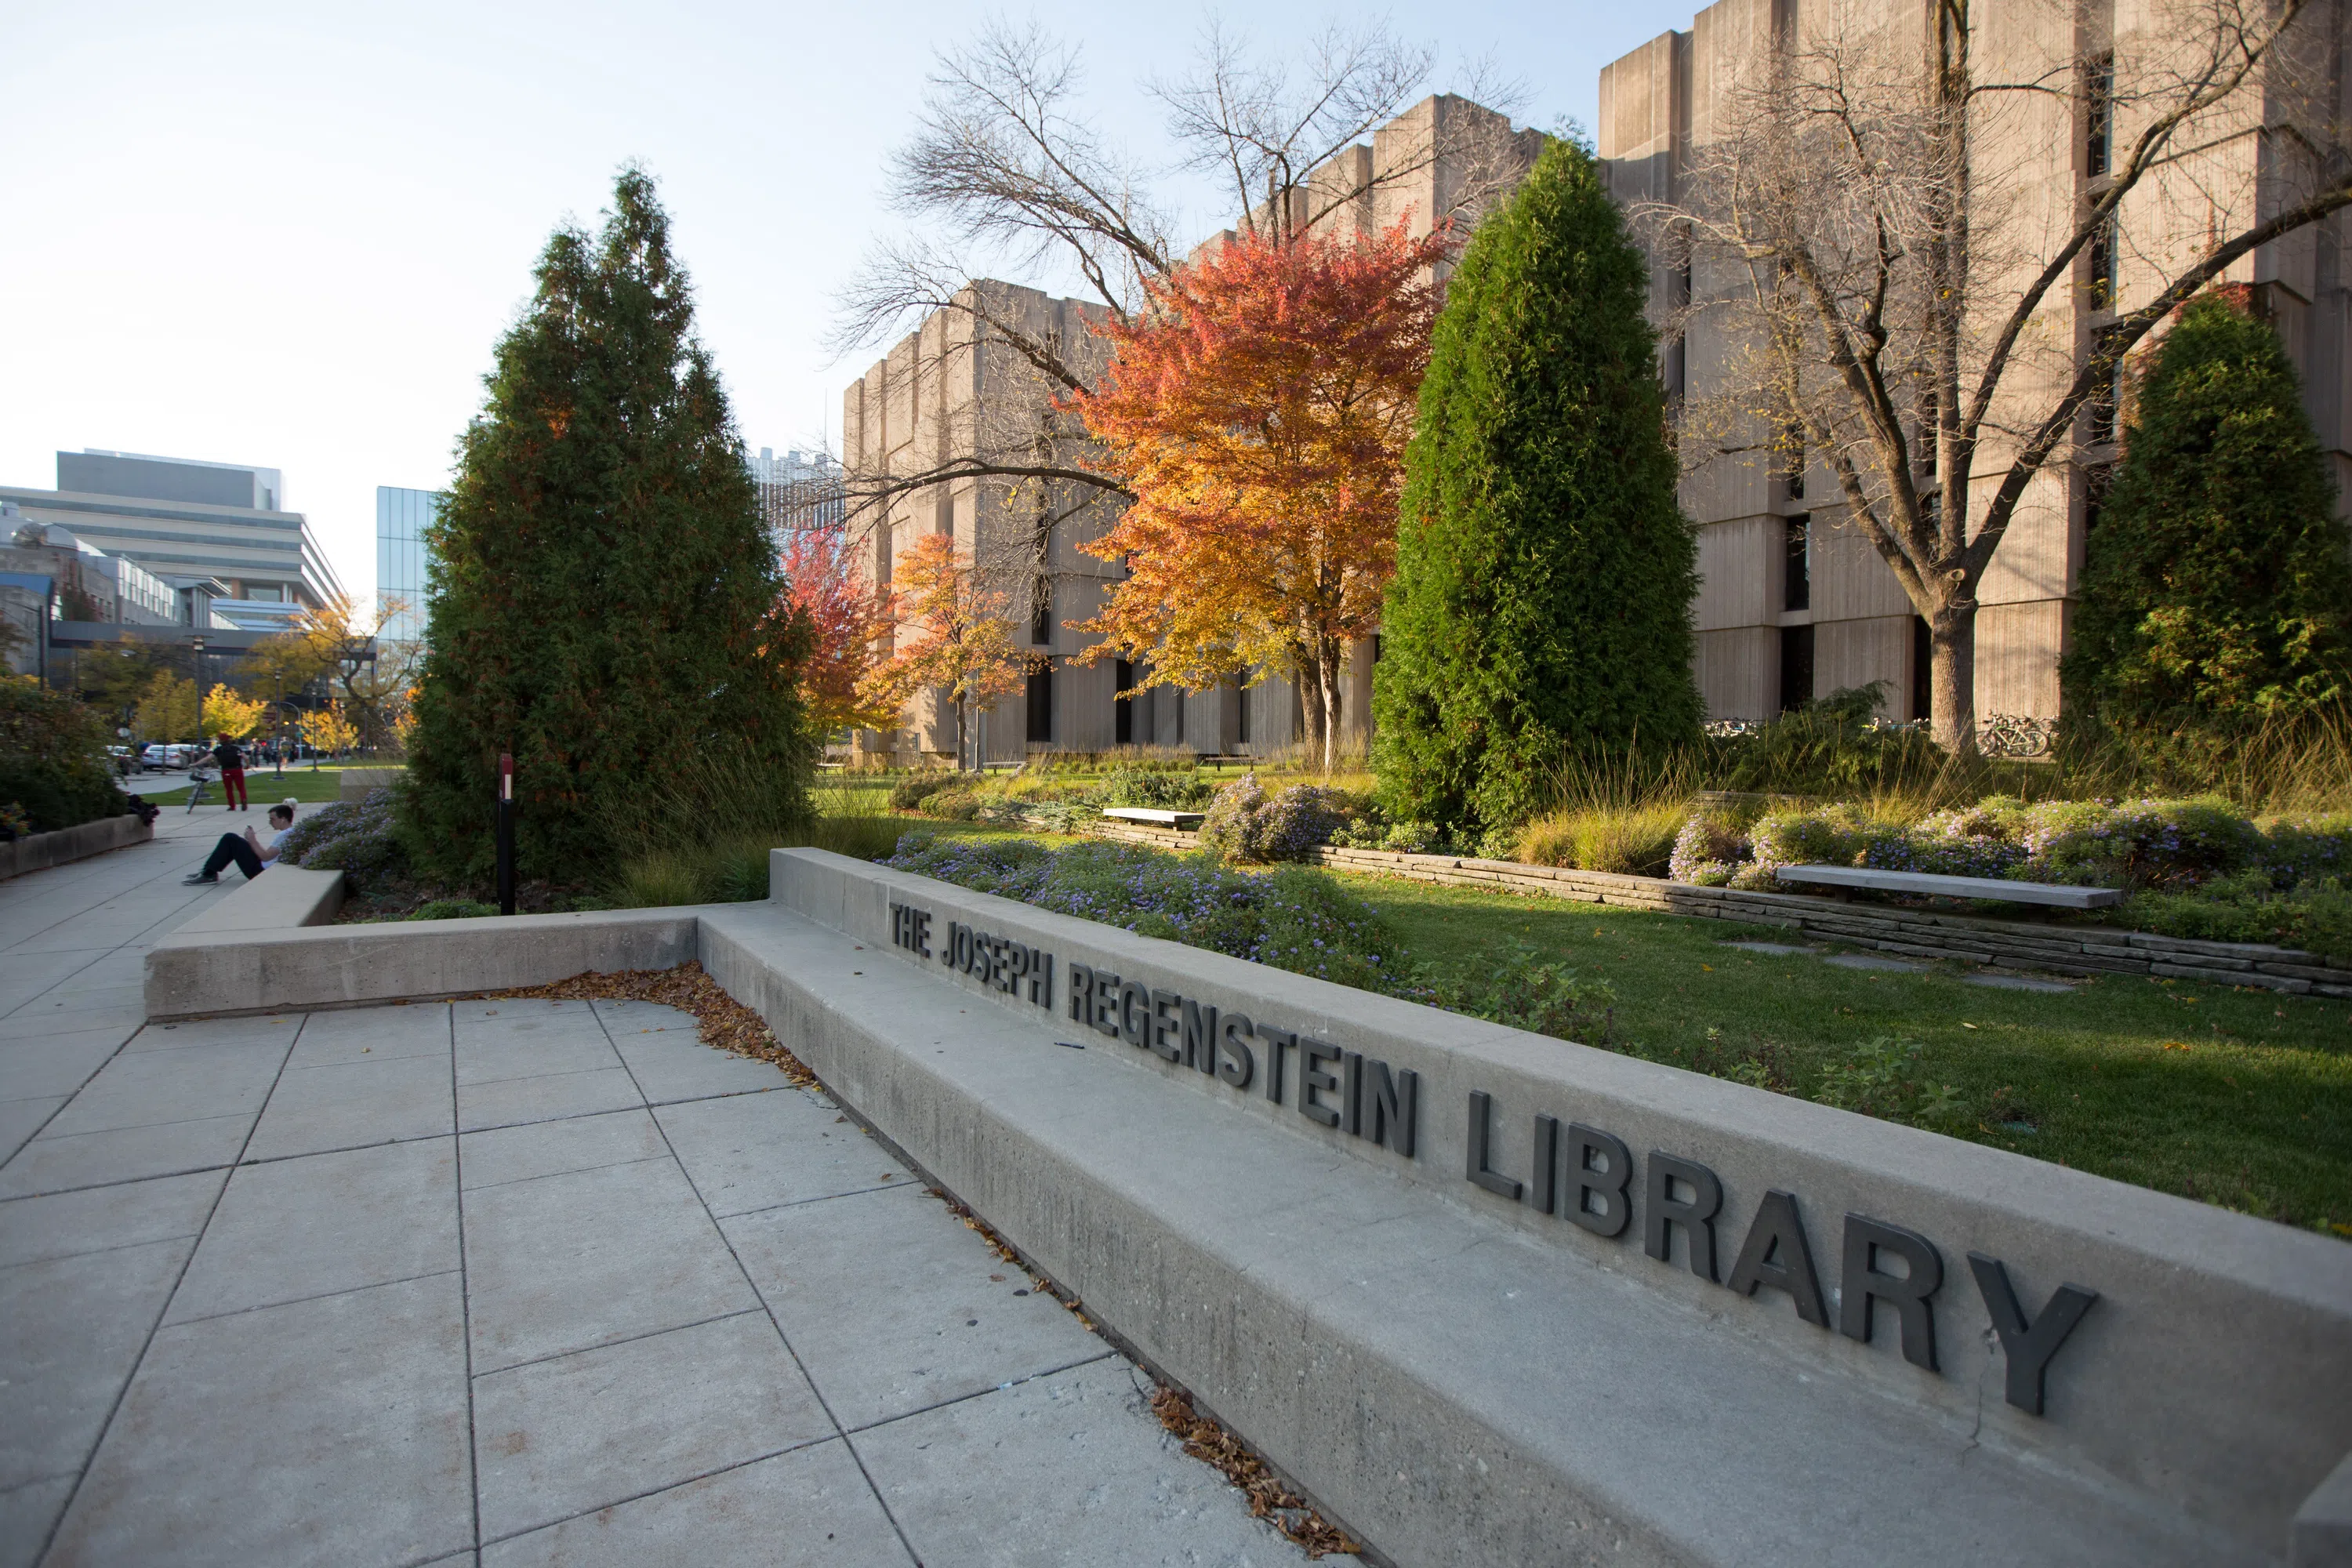 a sign in front of a building reading "The Joseph Regenstein Library"